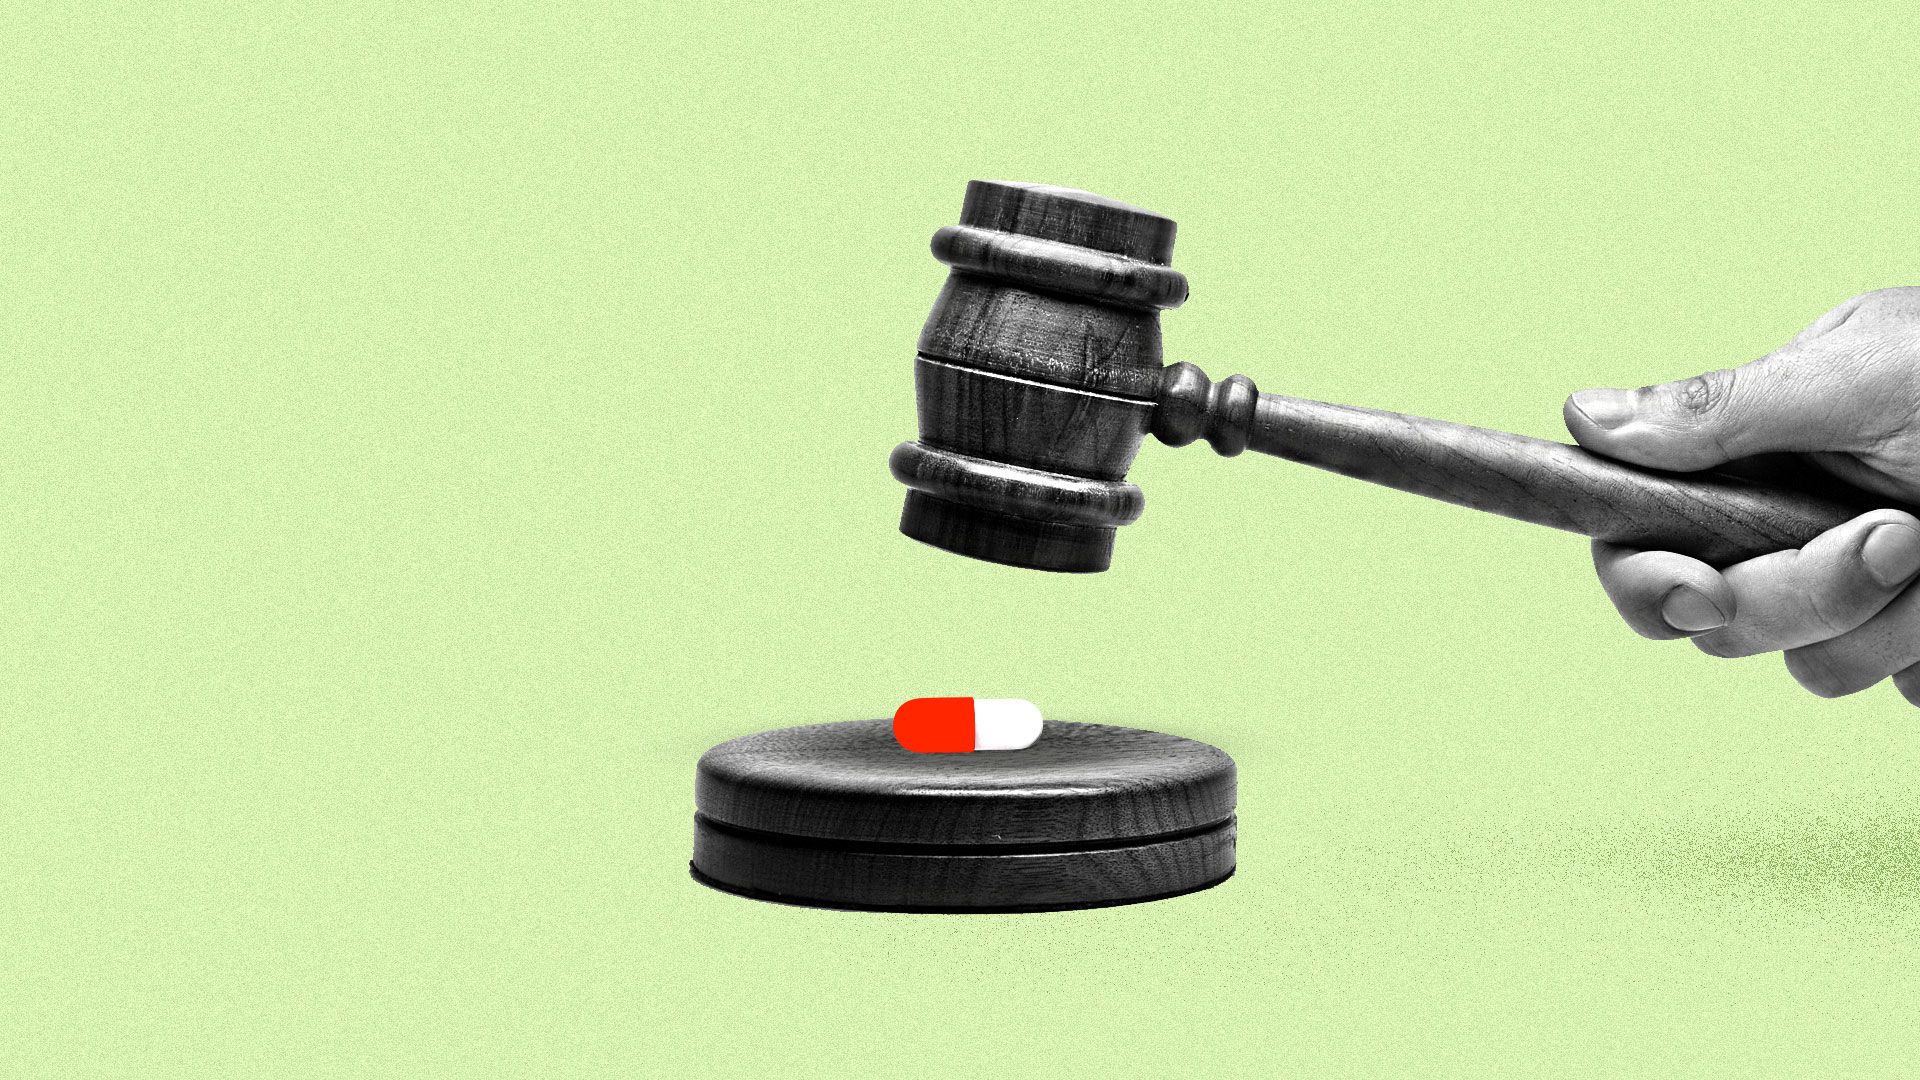 A judge's gavel about to crush a red and white pill.